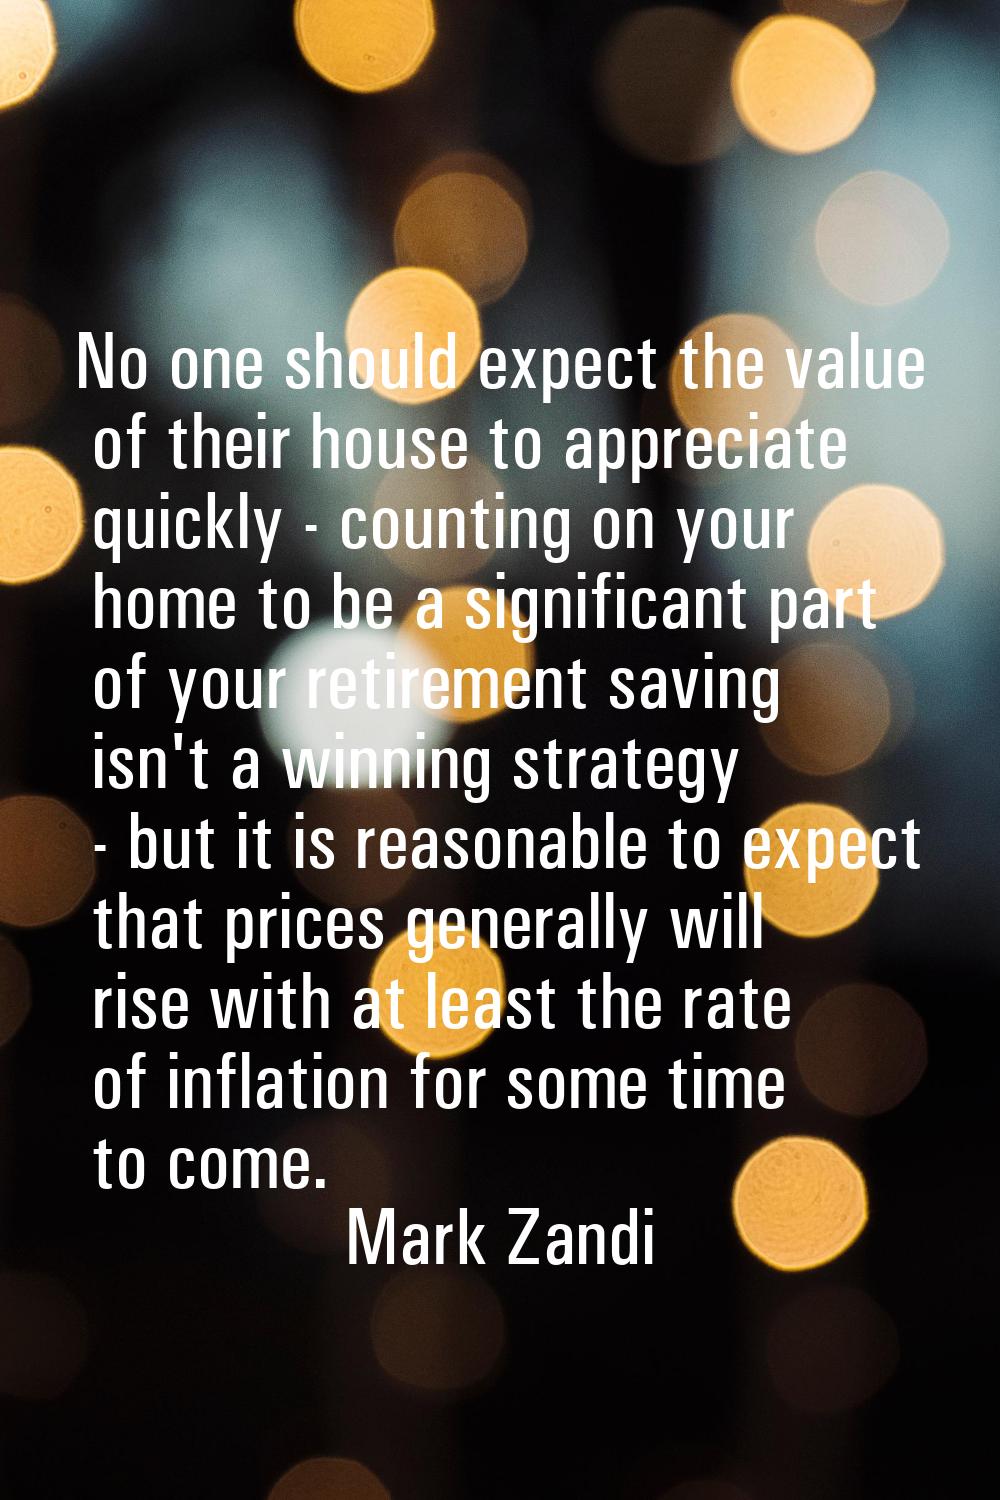 No one should expect the value of their house to appreciate quickly - counting on your home to be a